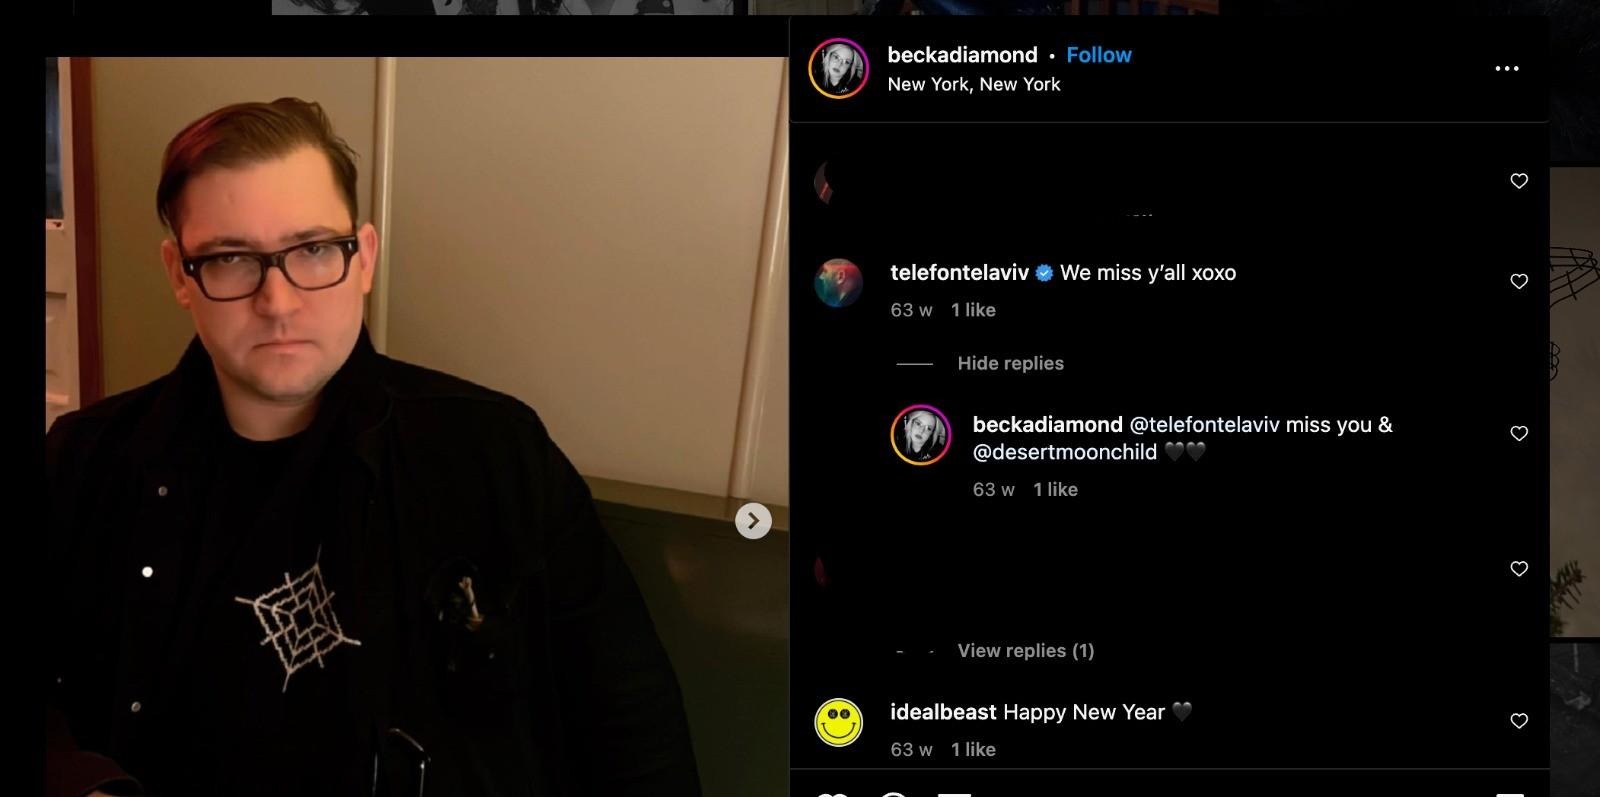 Instagram post from user @beckadiamond, showing at left an image of Dominick Fernow with a black jacket and a white patch or design on a shirt of a spider web or target design. At right, a comment is visible from @telefontelaviv, commenting "We miss y'all xoxo", under which @beckadiamond commented "@telefontelaviv miss you & @desertmoonchild" with two black heart emoji. Underneath, there is a comment from user @idealbeast, "Happy New Year" with a black heart emoji.